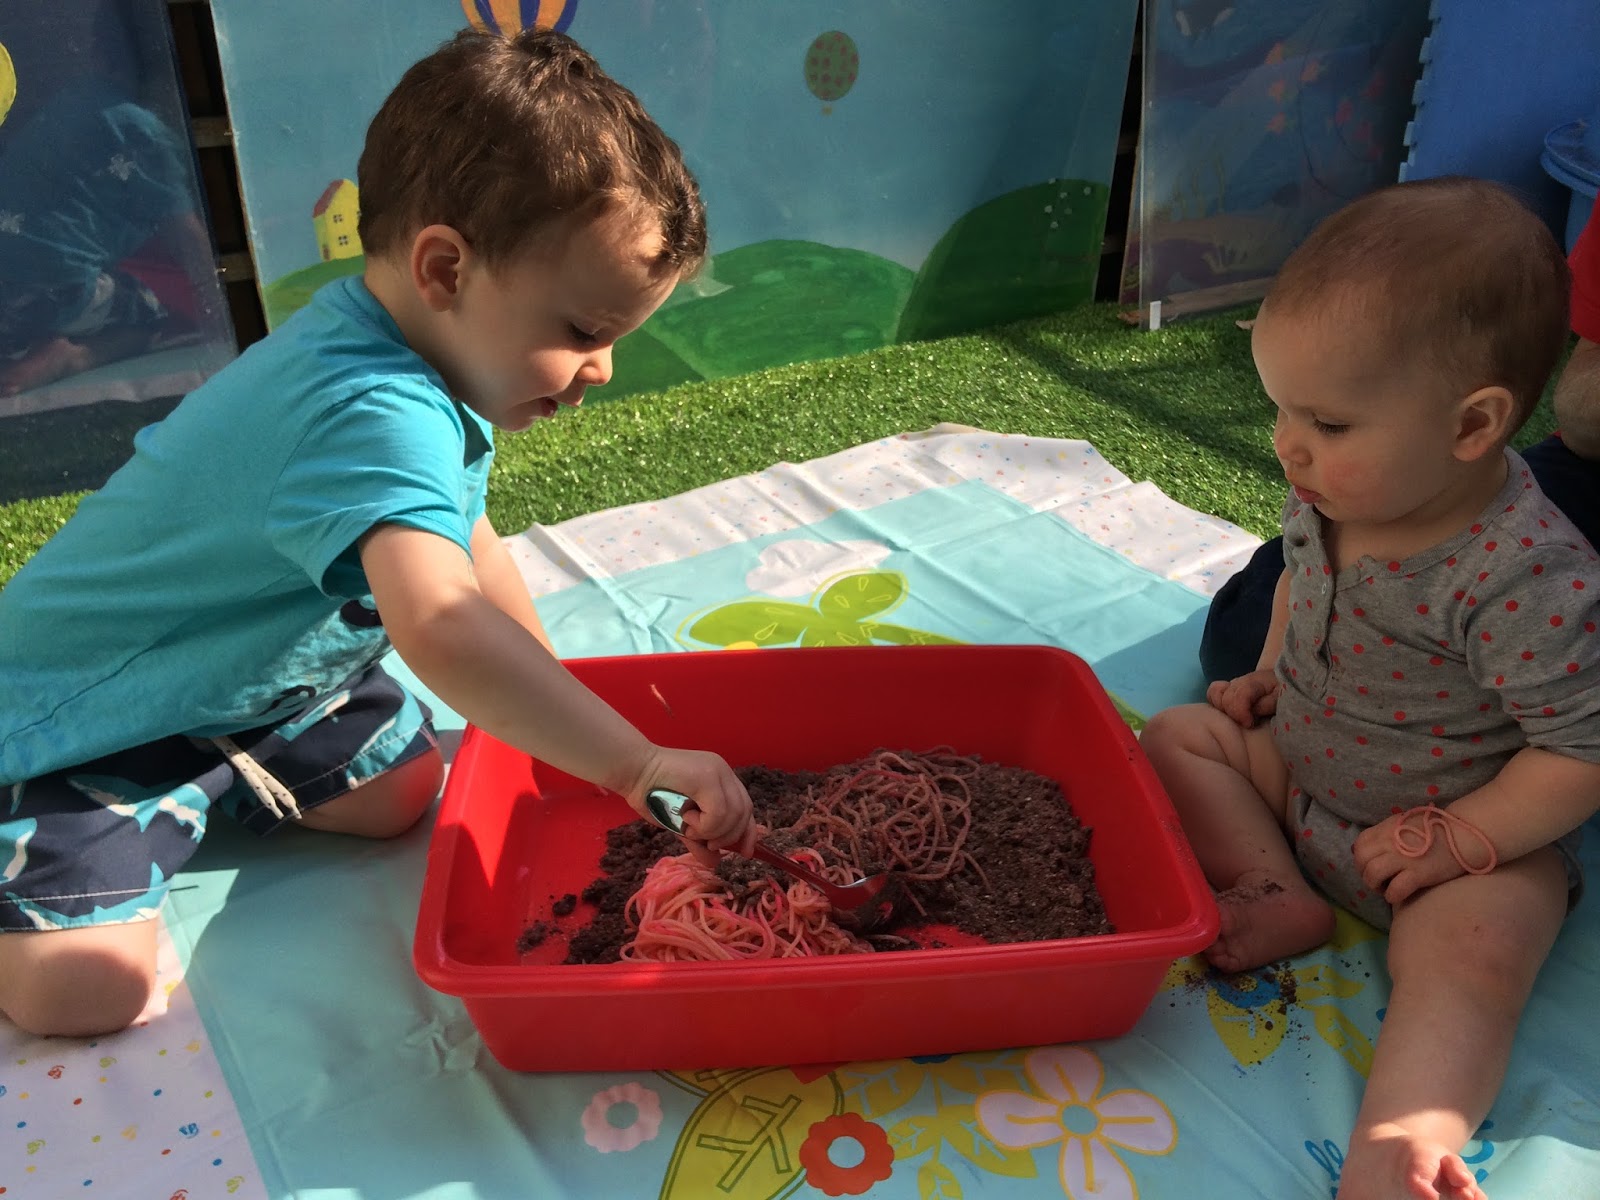 Mum first, doctor second: Edible muddy worms